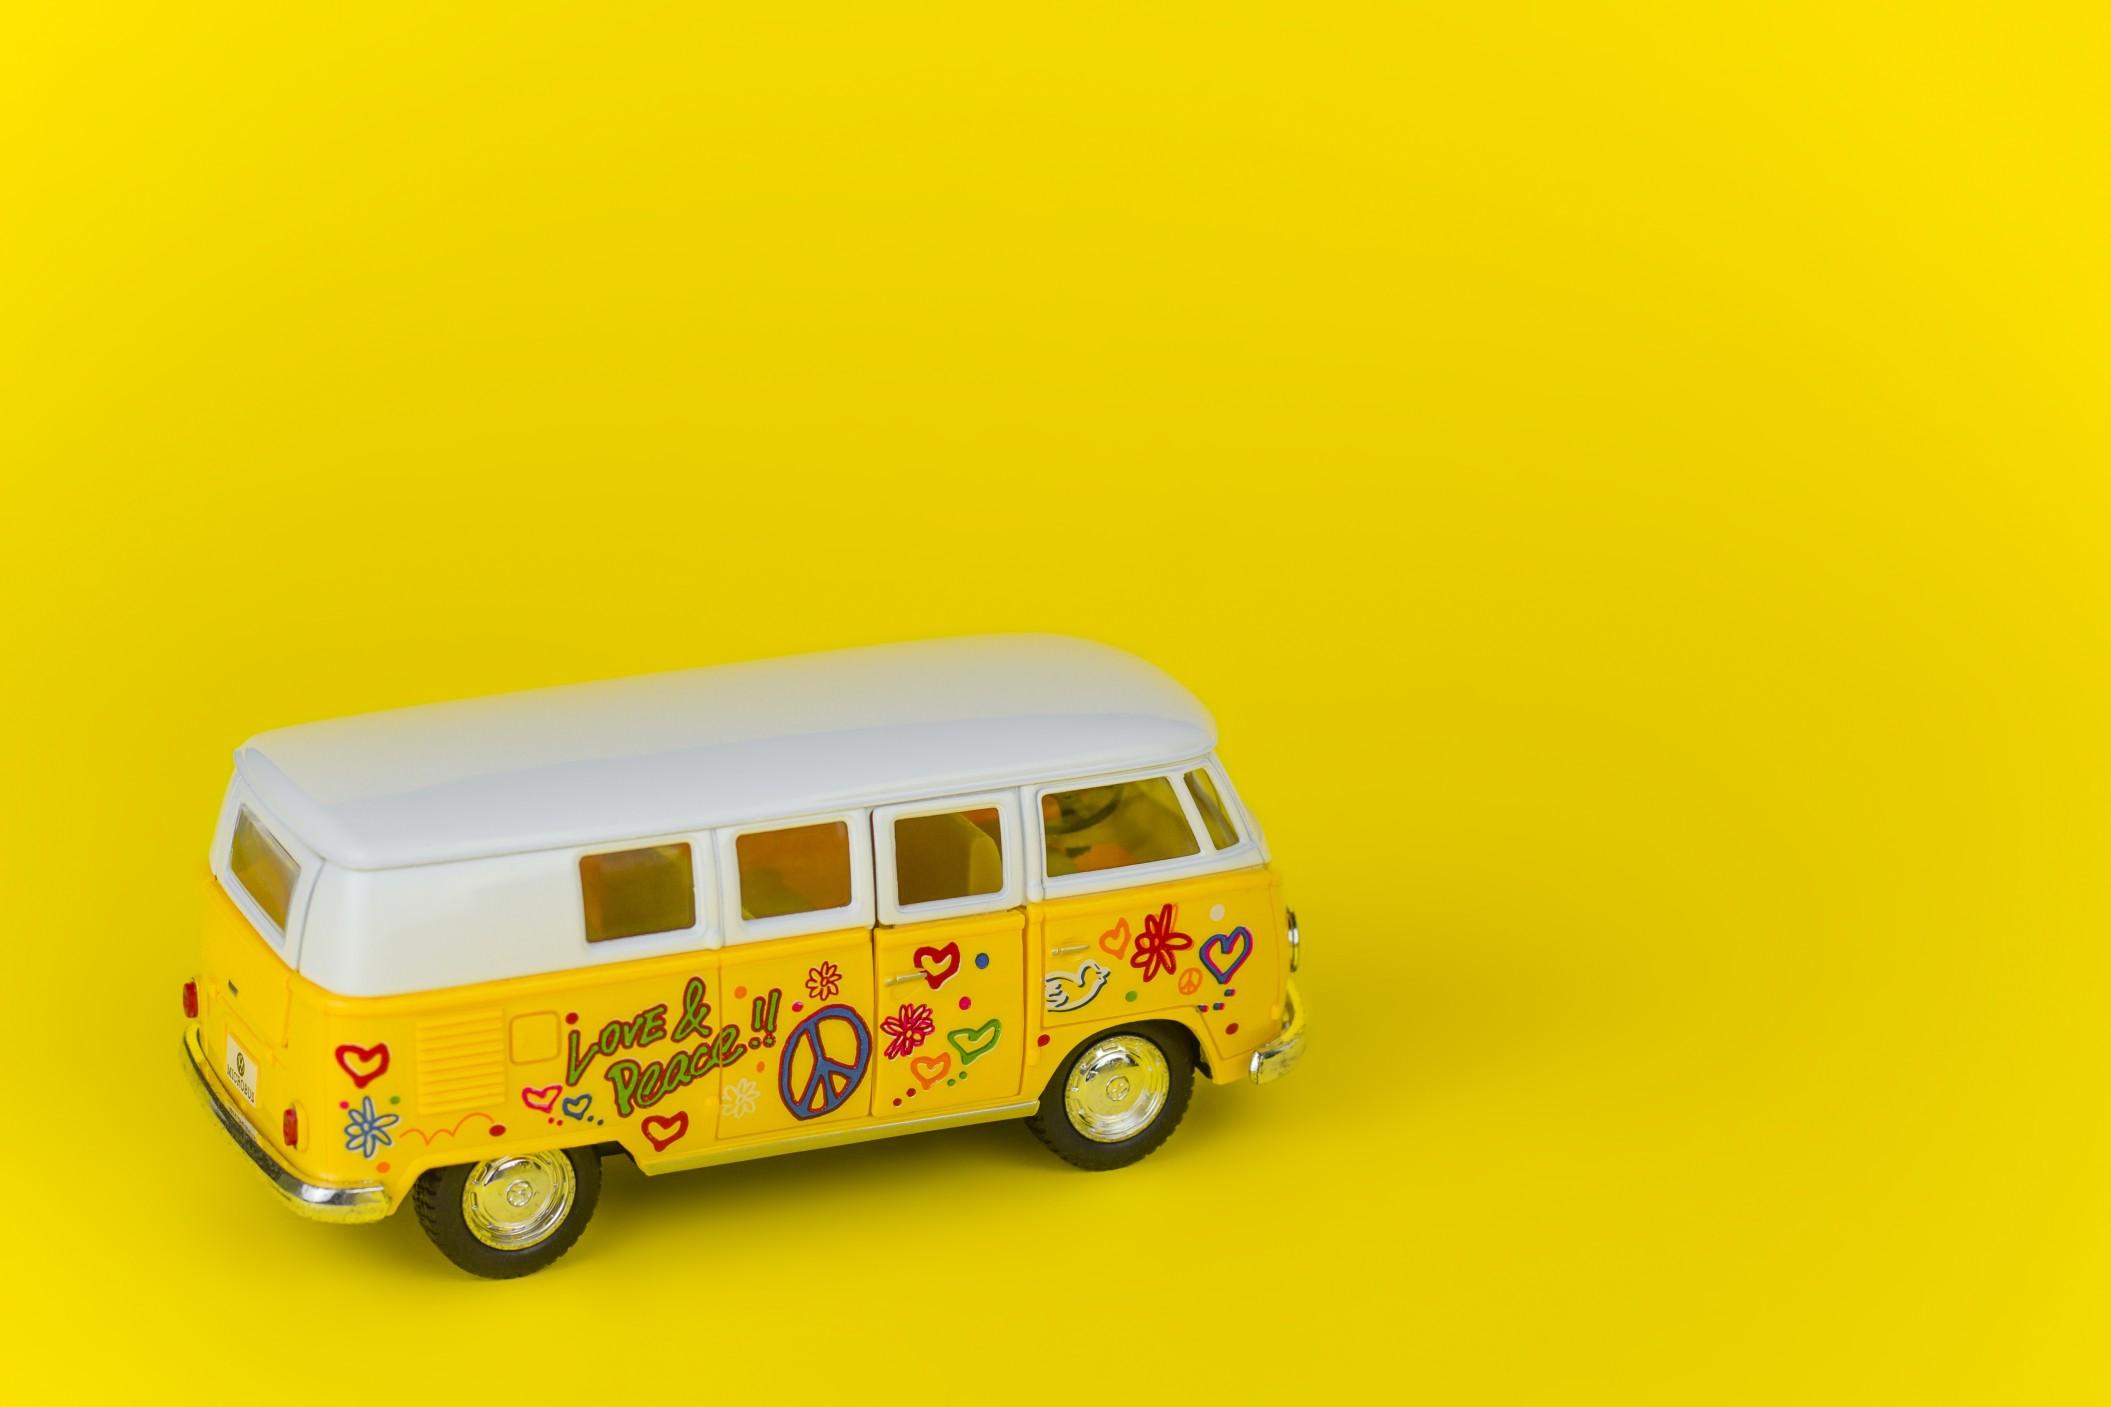 A hippie bus on a yellow background 